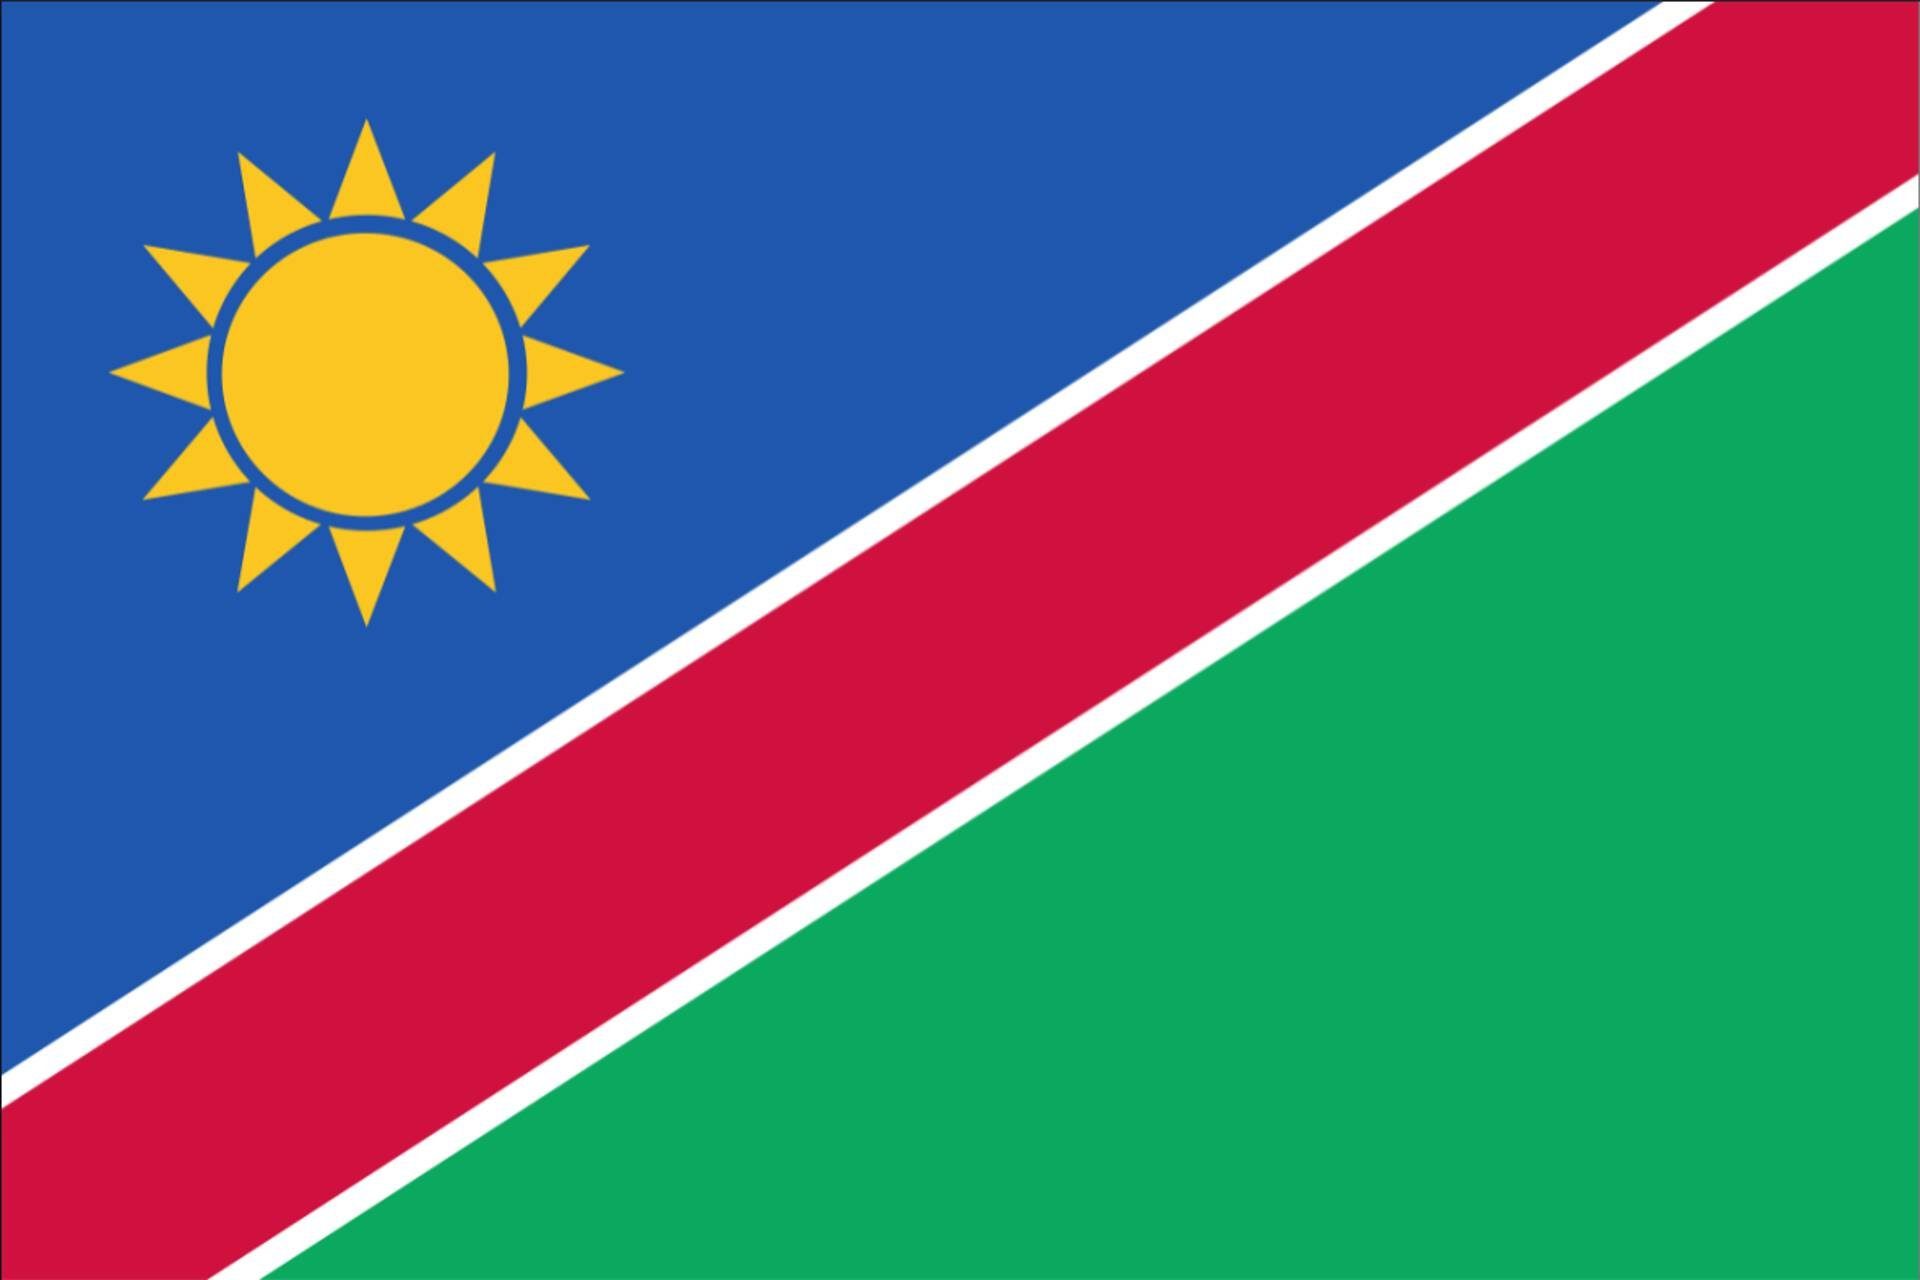 Querformat Namibia flaggenmeer 120 g/m² Flagge